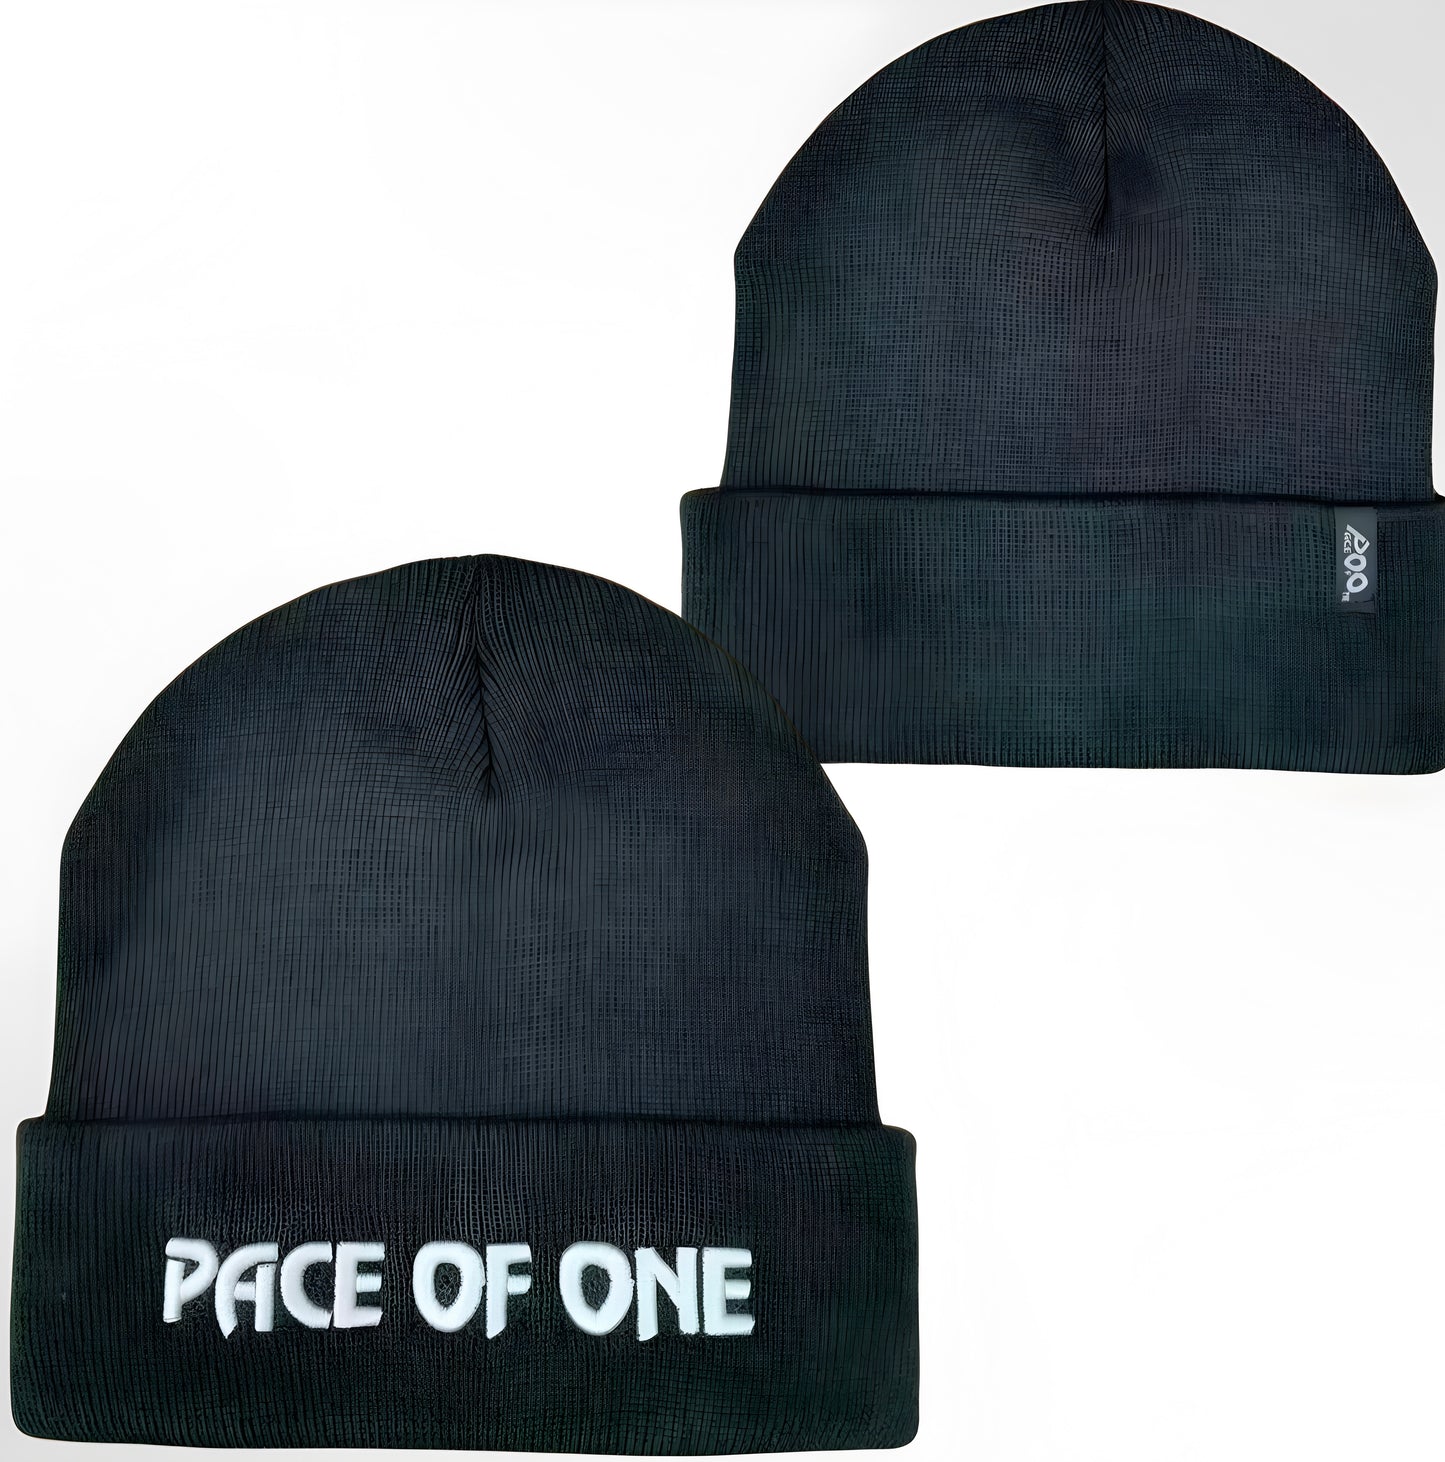 Beanie Hat - Pace-Of-One